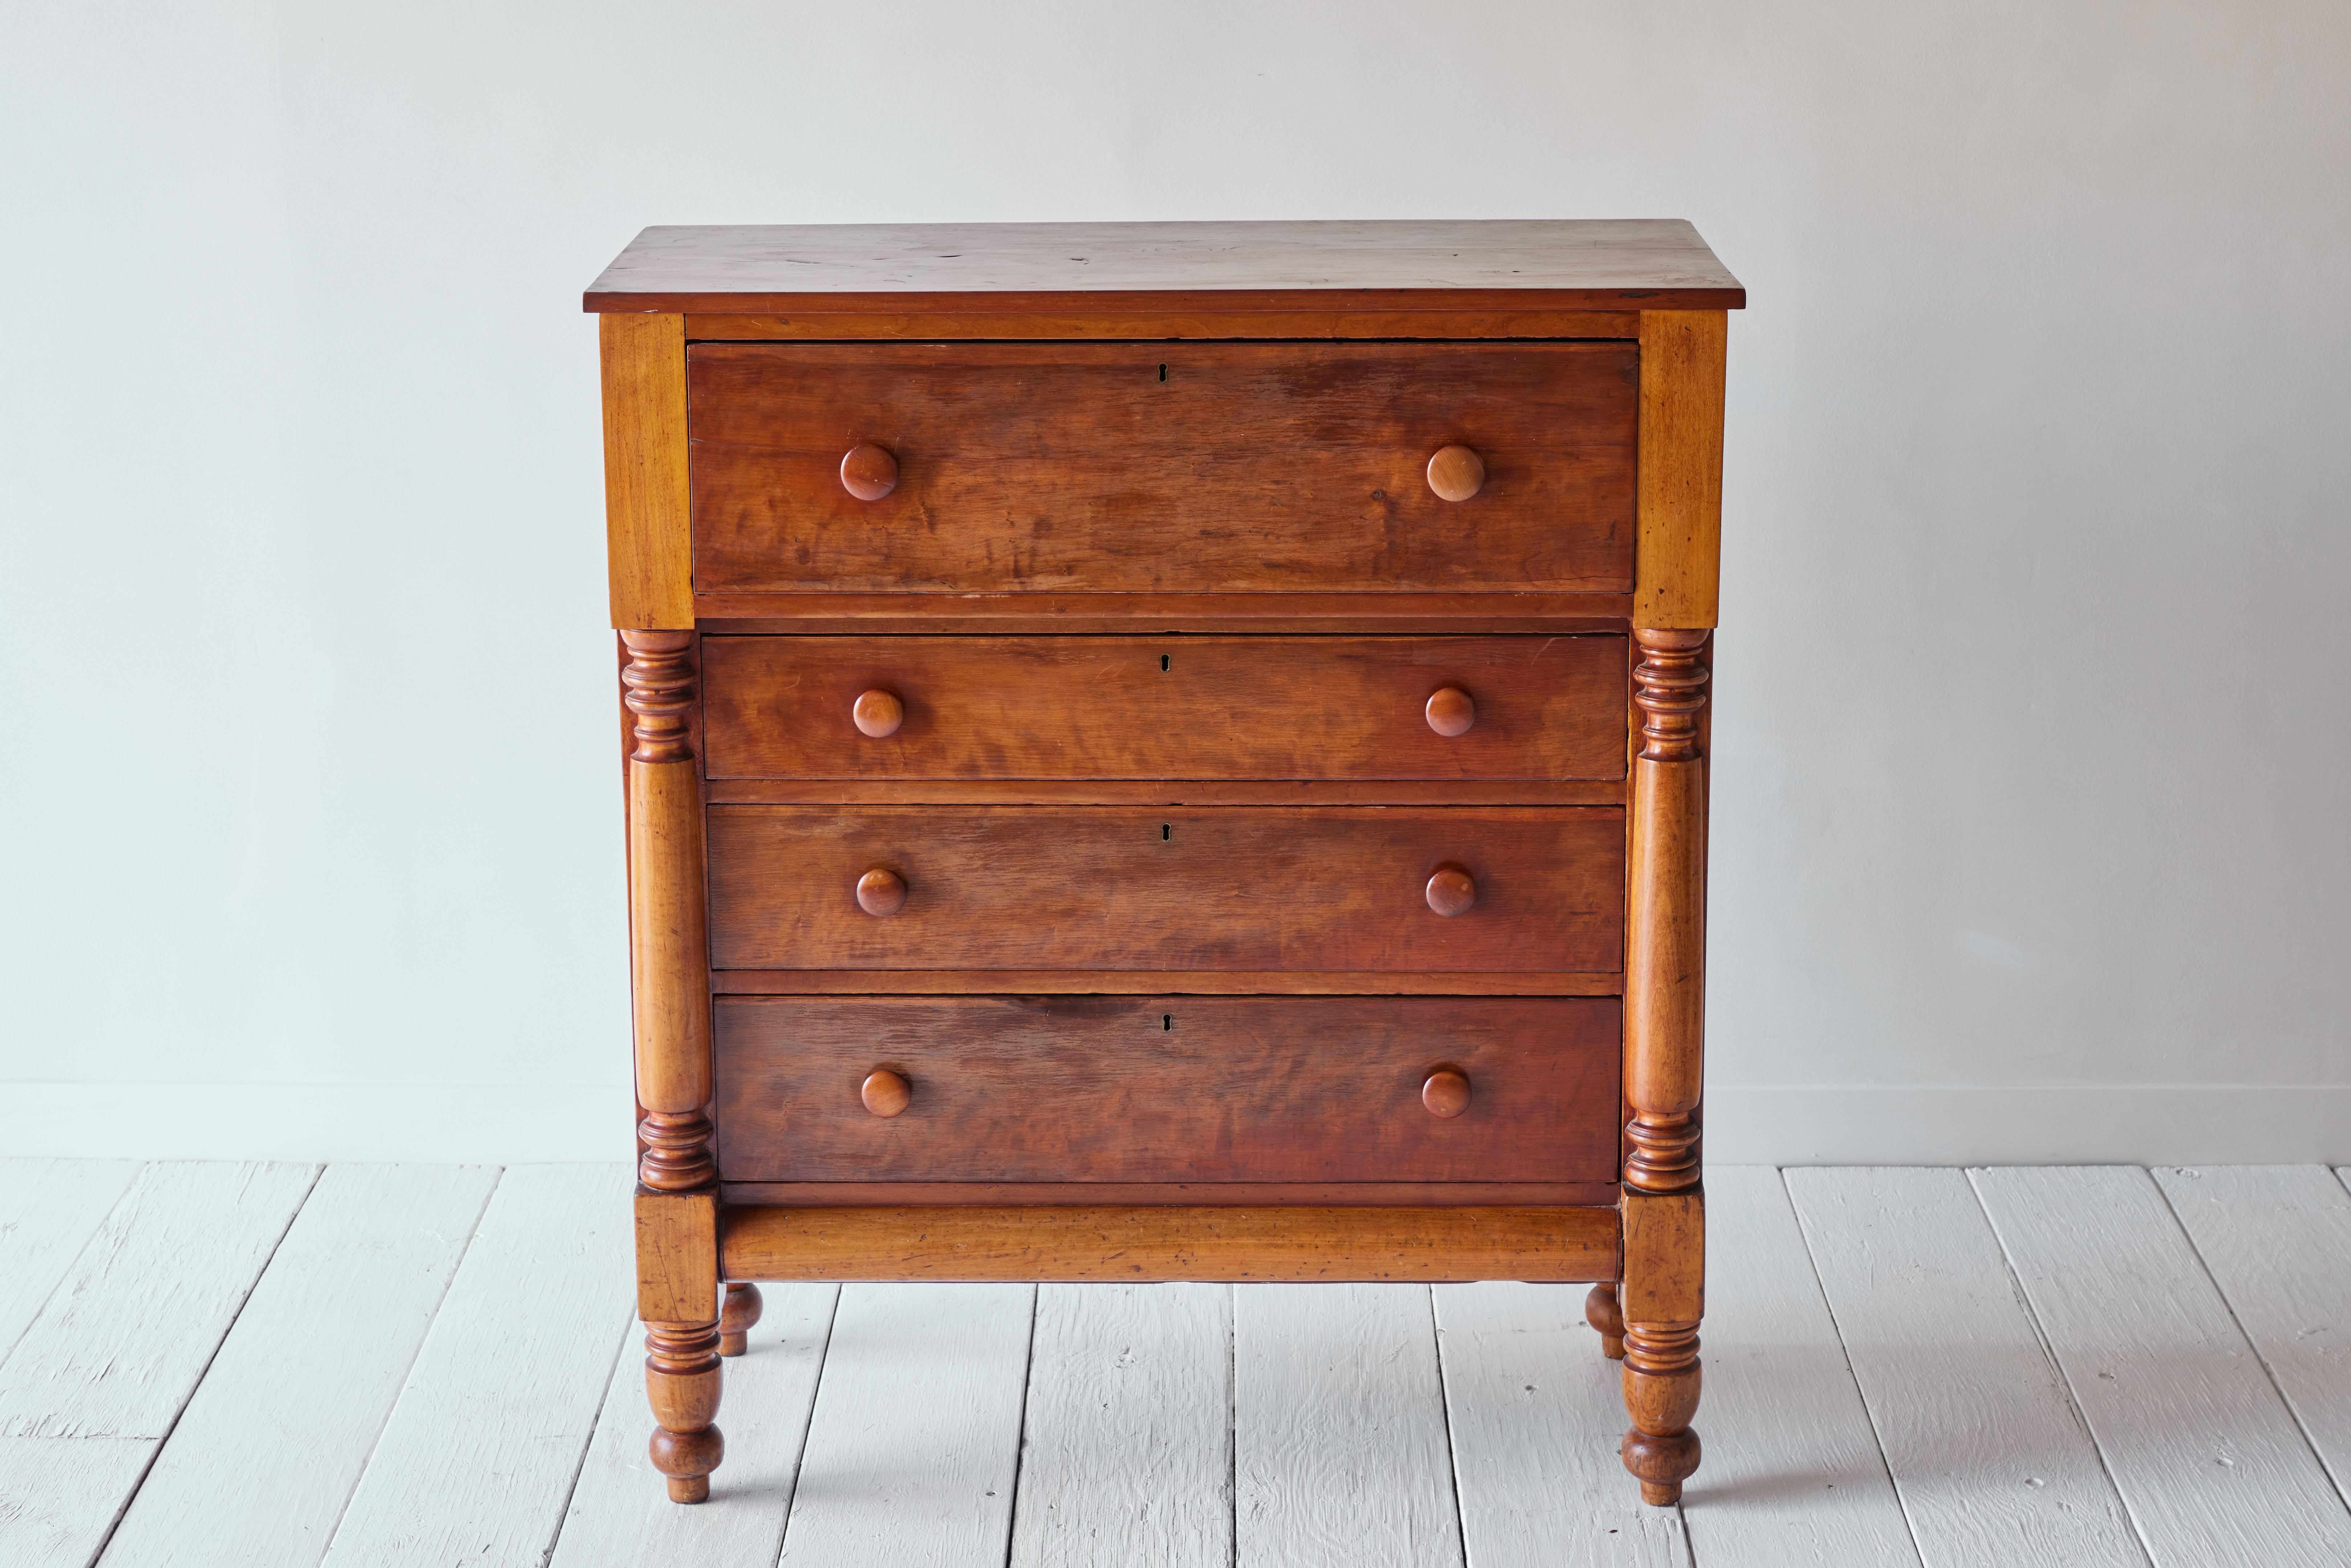 Antique American chest of drawers circa 1840 with turned wood mushroom knobs and an overhanging top. The first drawer is large with three graduated drawers below, turned front legs and straight back legs. The chest has a beautiful patina and each